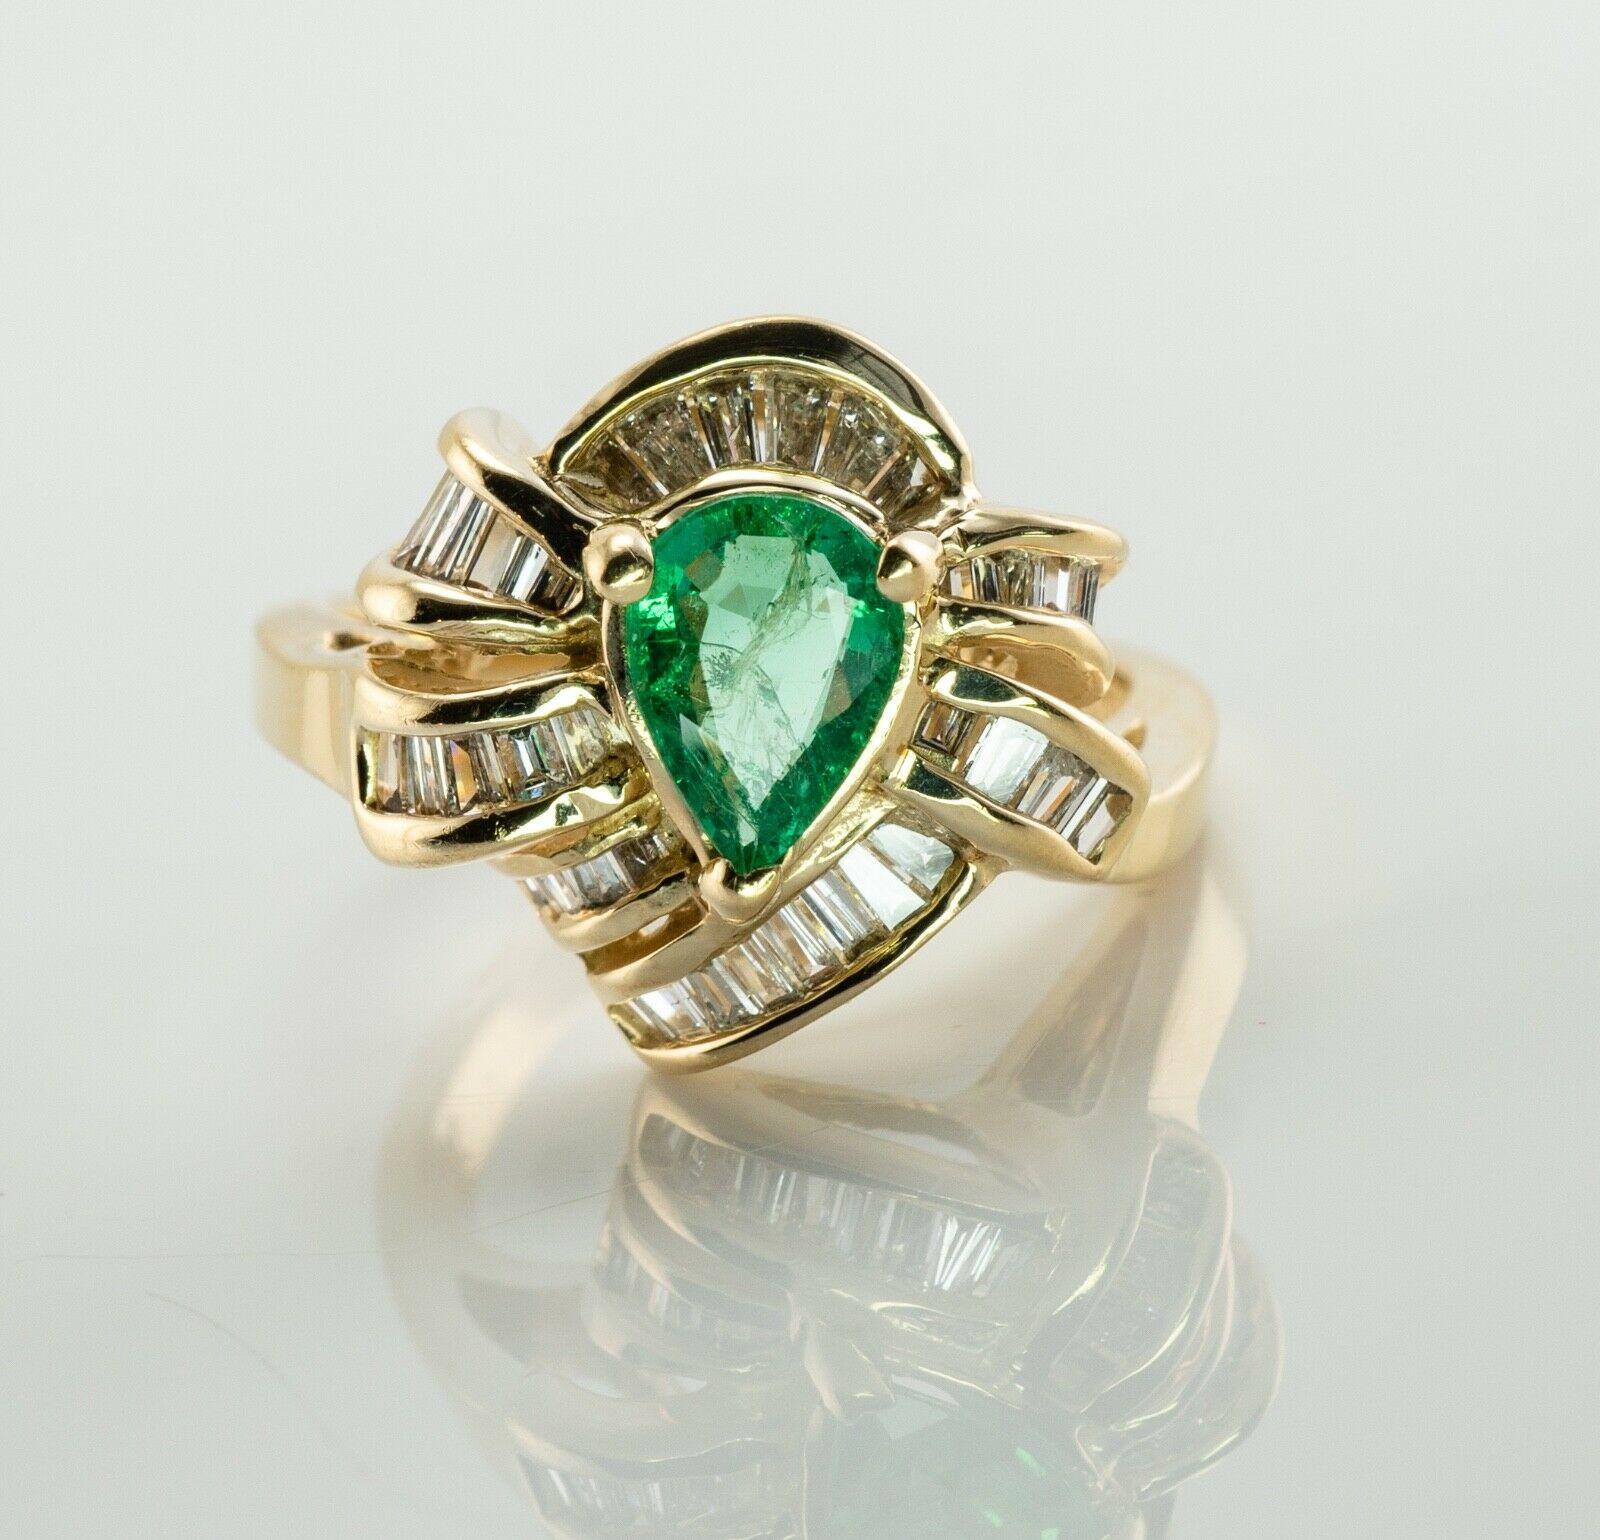 This beautiful estate ring is finely crafted in solid 14K Yellow gold and set with genuine Earth mined Emerald and natural diamonds. The center pear cut Emerald measures 7mm x 5mm (.70 carats), and this is a very clean and transparent gem of a great